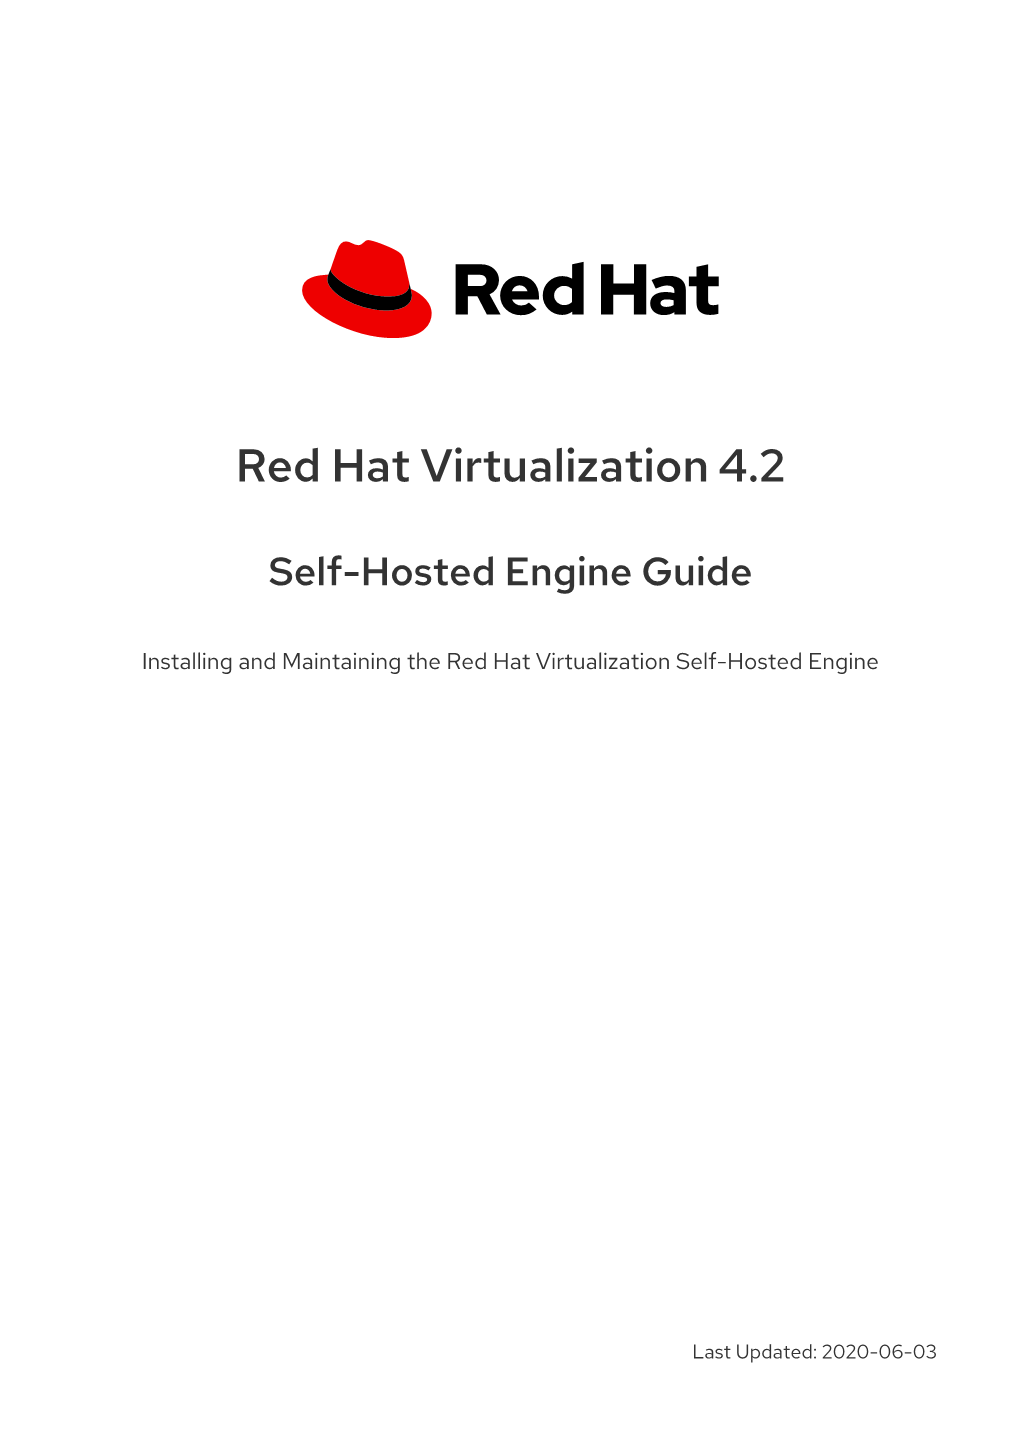 Red Hat Virtualization 4.2 Self-Hosted Engine Guide